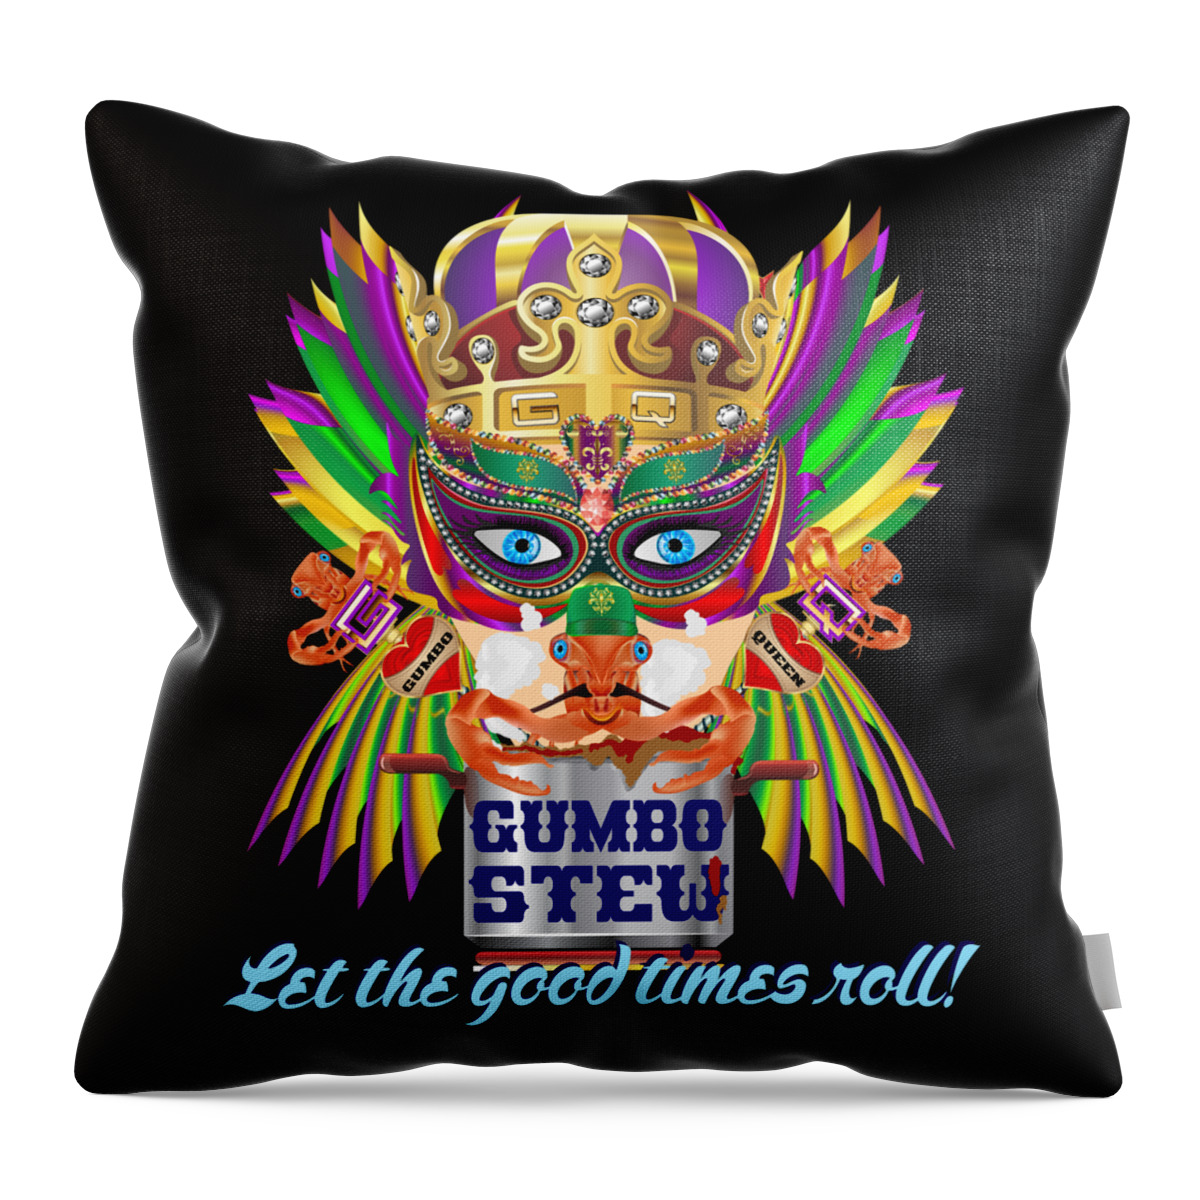 Gumbo Queen Throw Pillow featuring the digital art Gumbo Queen 6 All Products by Bill Campitelle